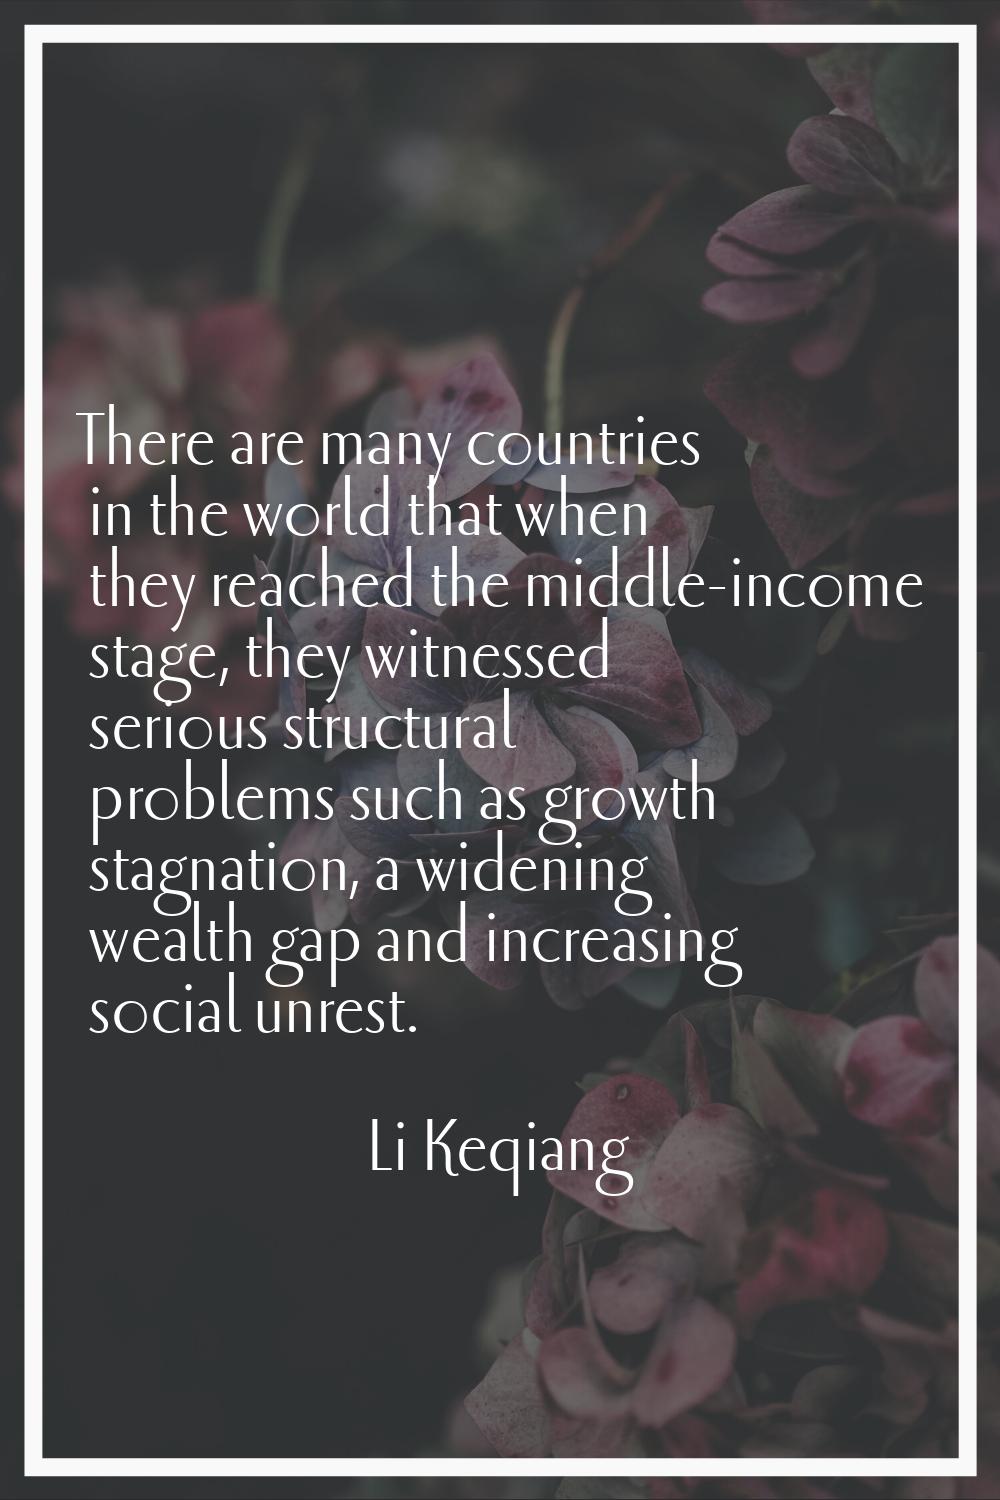 There are many countries in the world that when they reached the middle-income stage, they witnesse